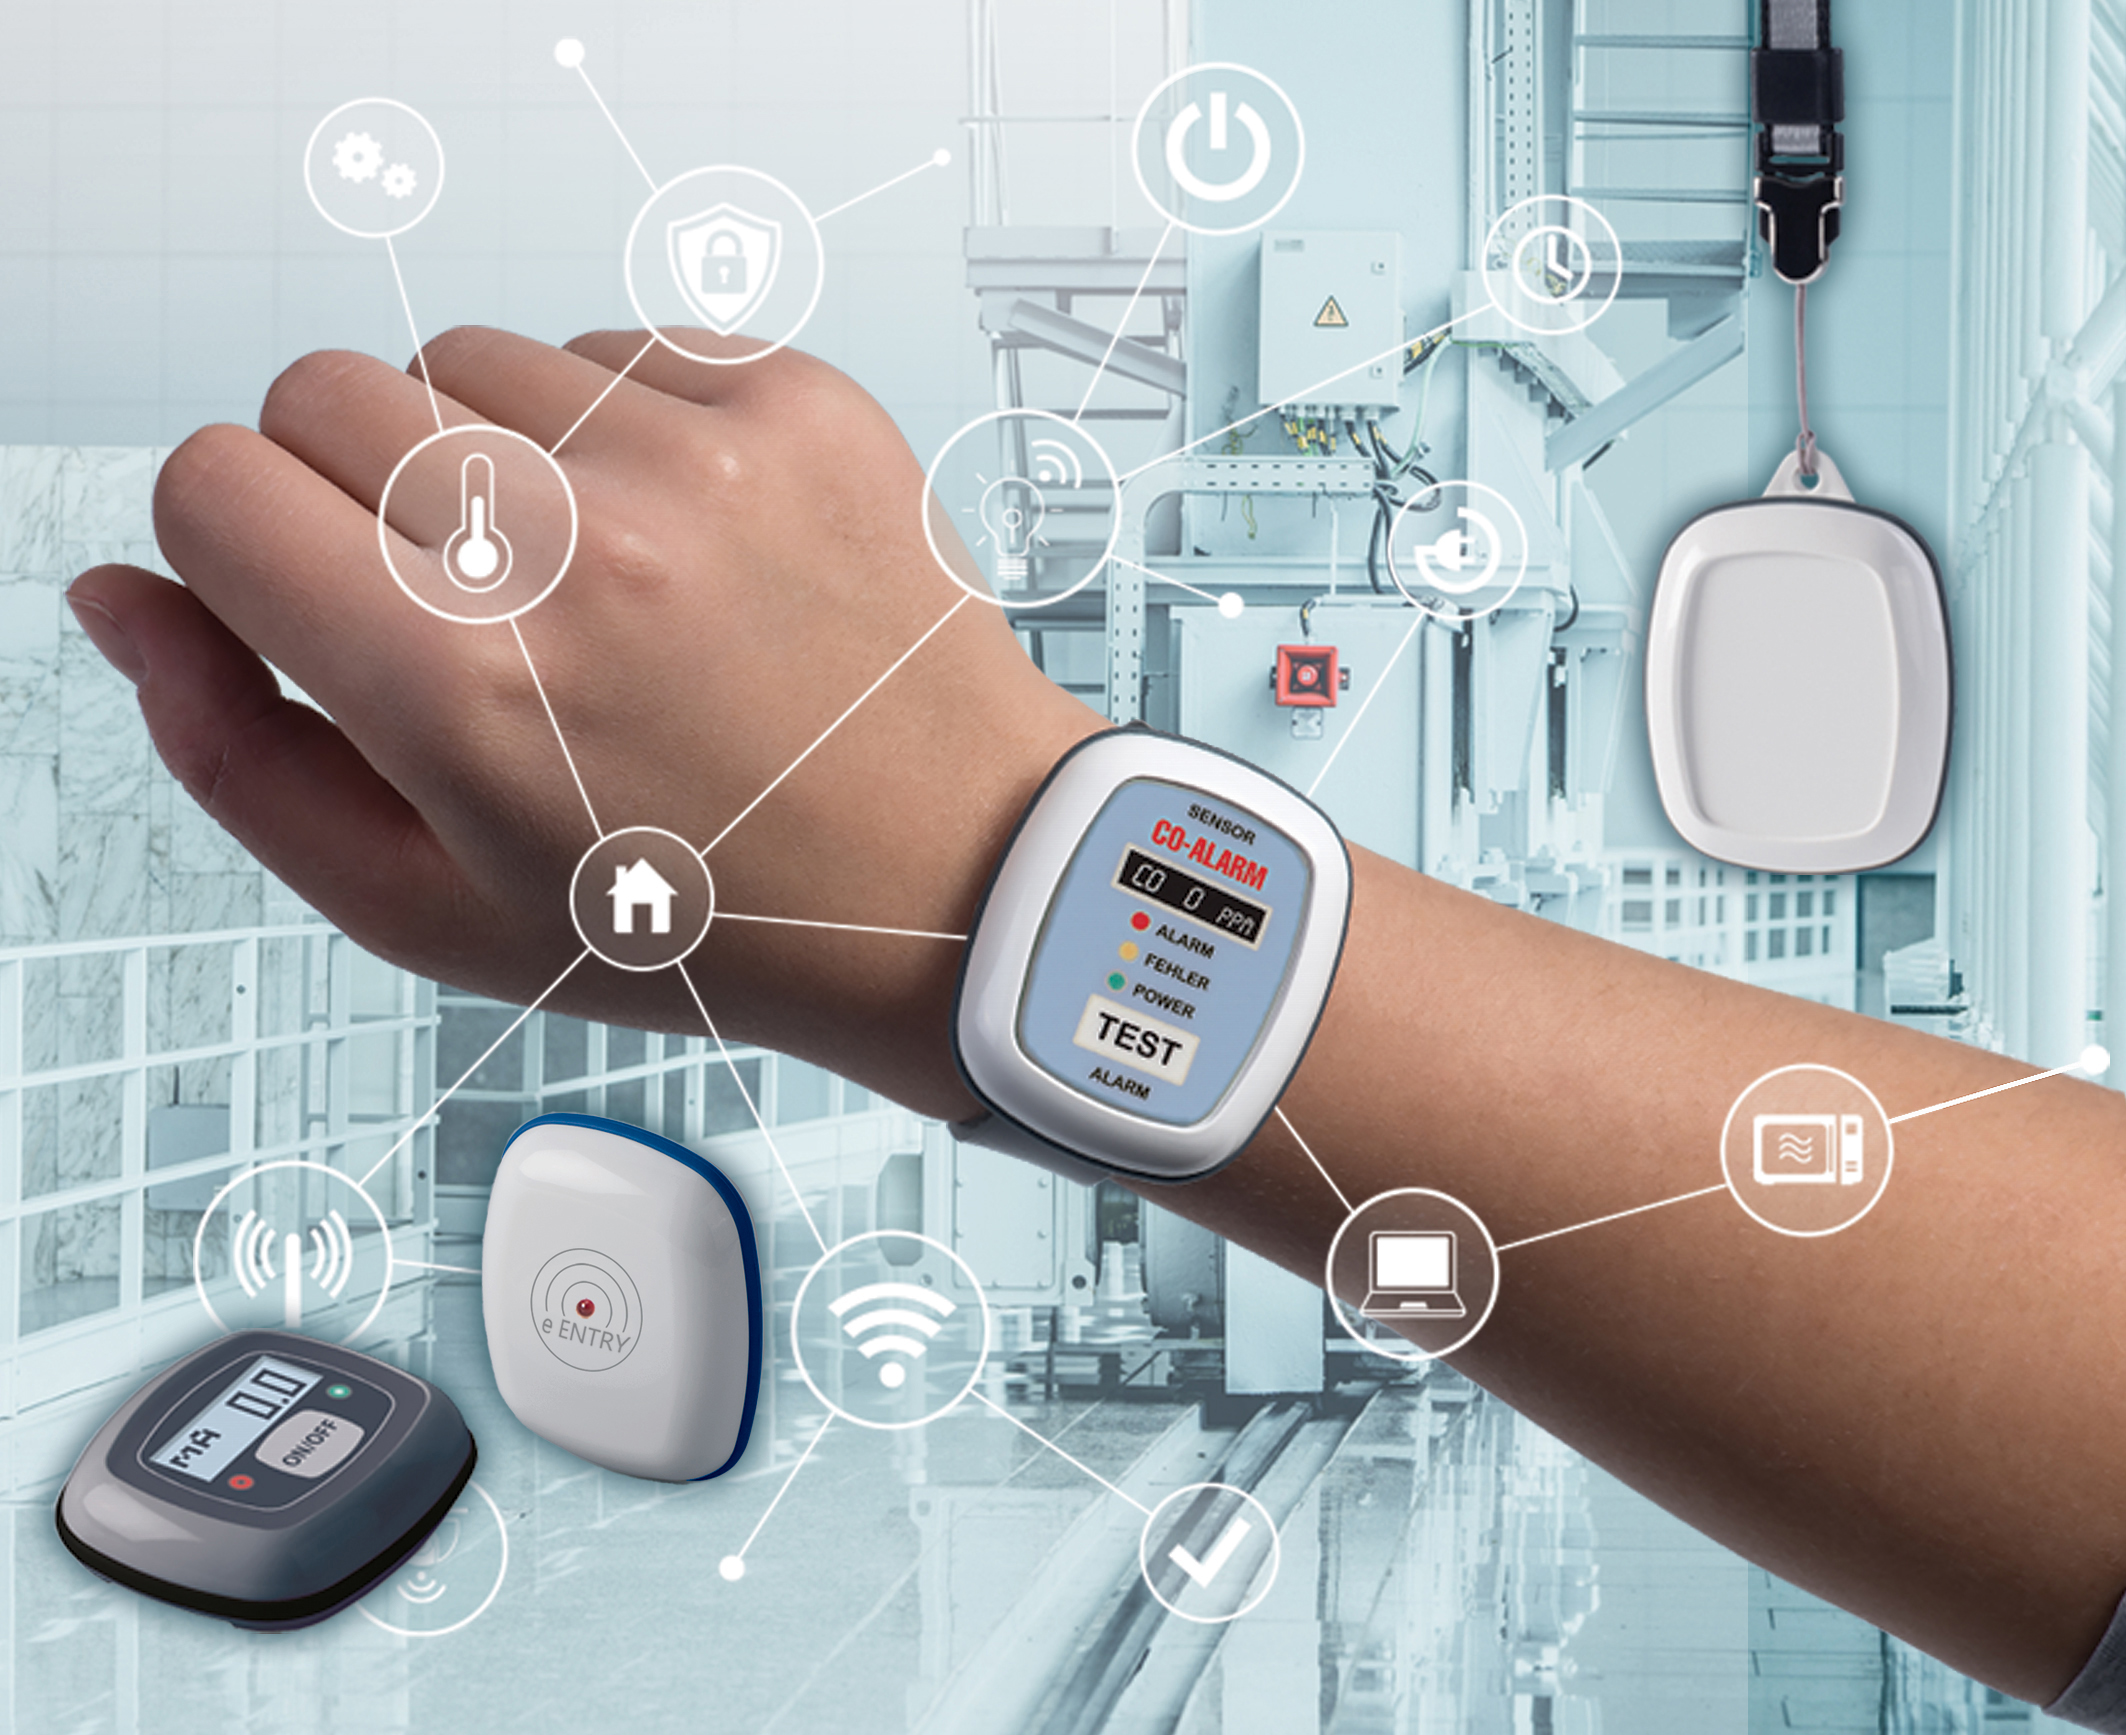 OKW’S BODY-CASE WEARABLE PLASTIC ENCLOSURES FOR IoT/IIoT